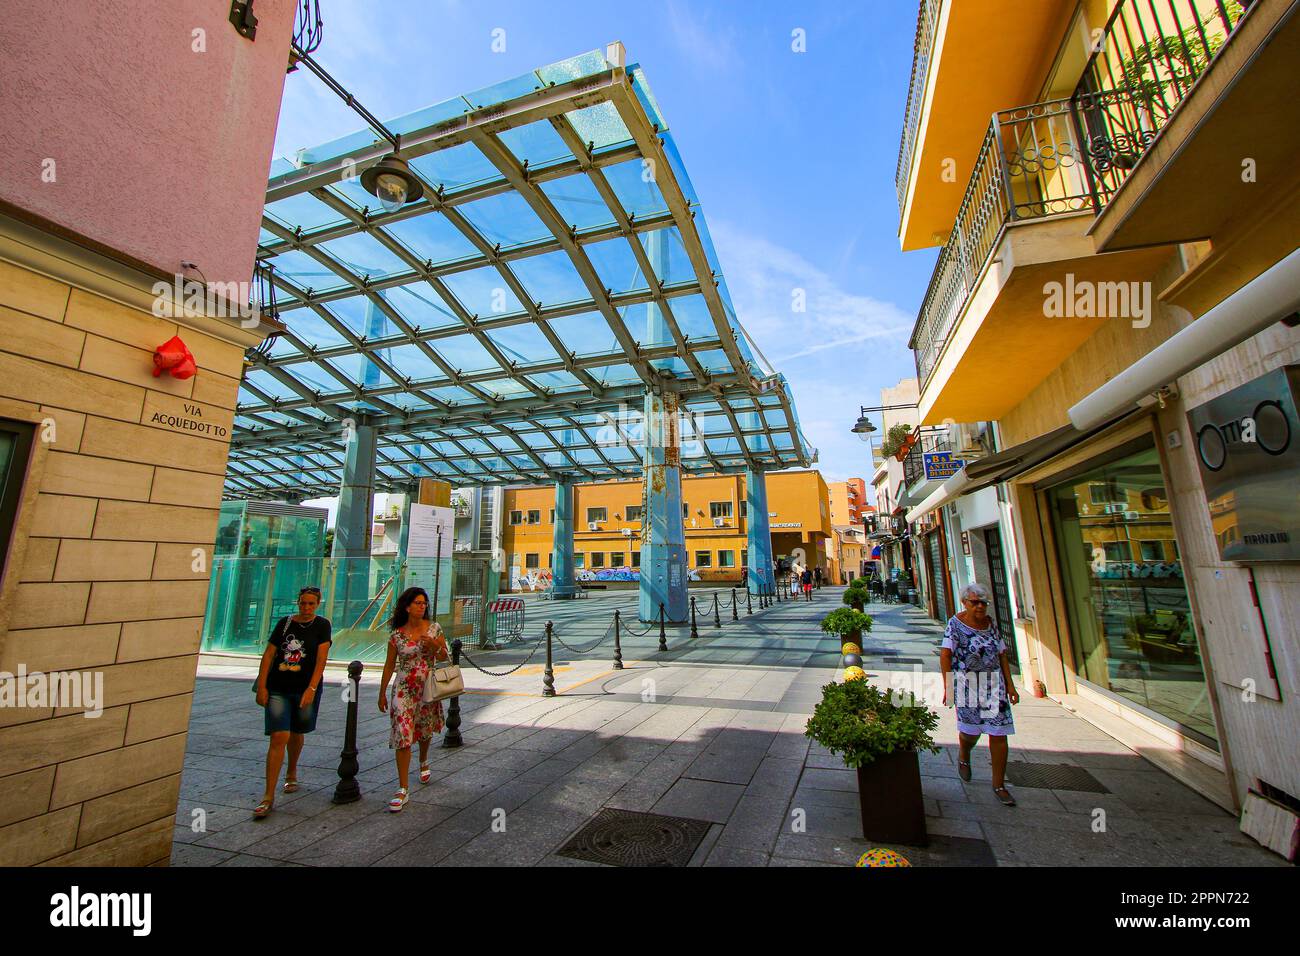 Olbia, Sardinia - August 8, 2019 : Glass cover of 'Piazza Mercato', the Market Square of the historical city center of Olbia, an old town located by t Stock Photo